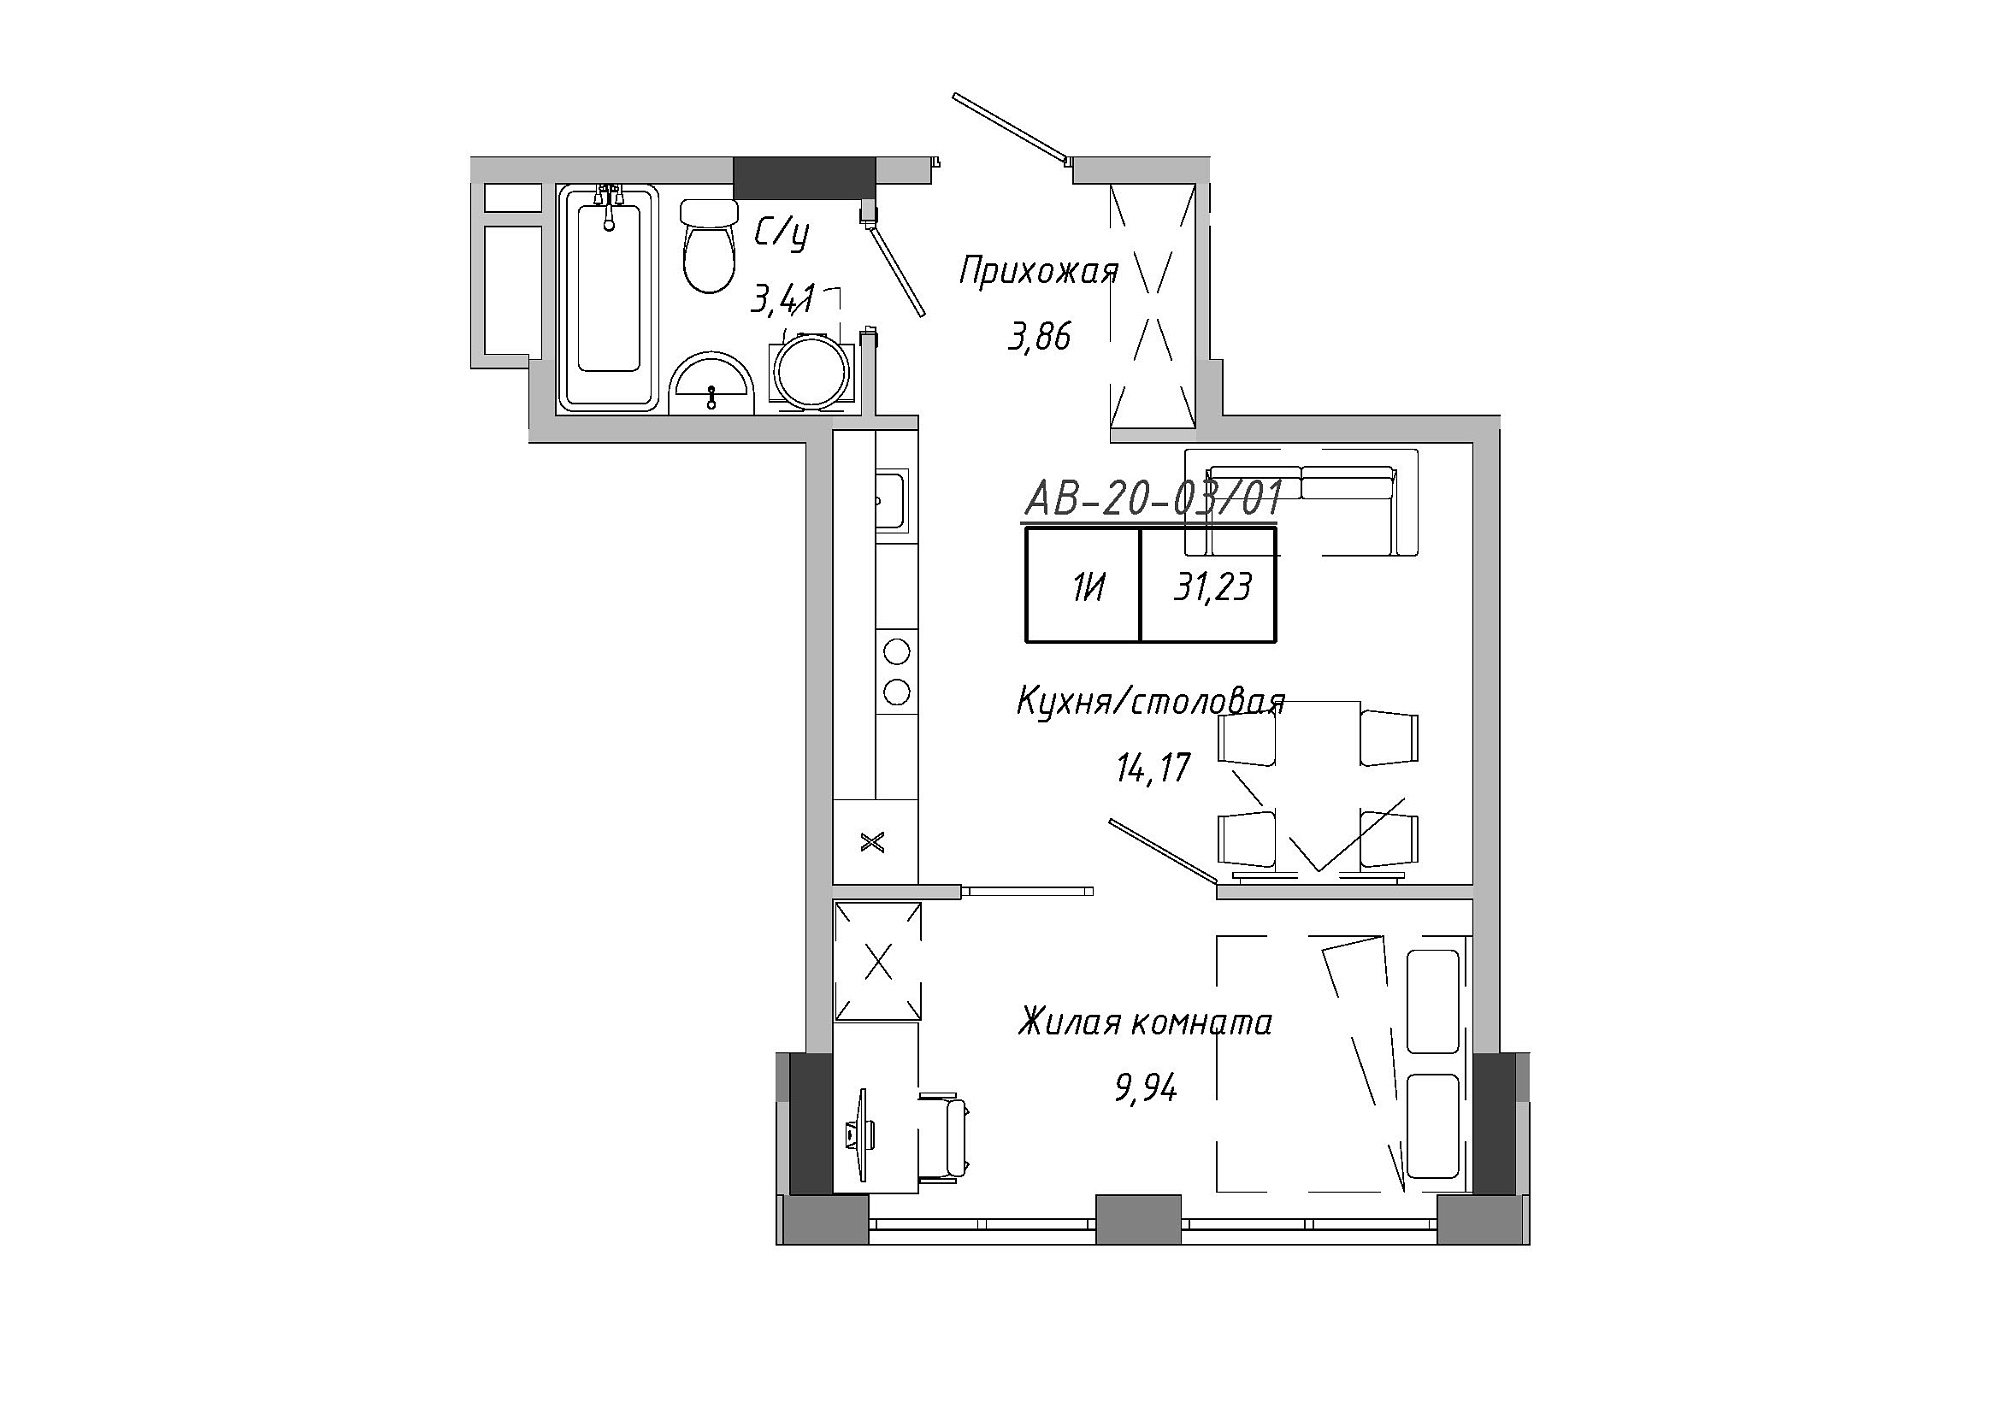 Planning 1-rm flats area 31.23m2, AB-20-03/00001.